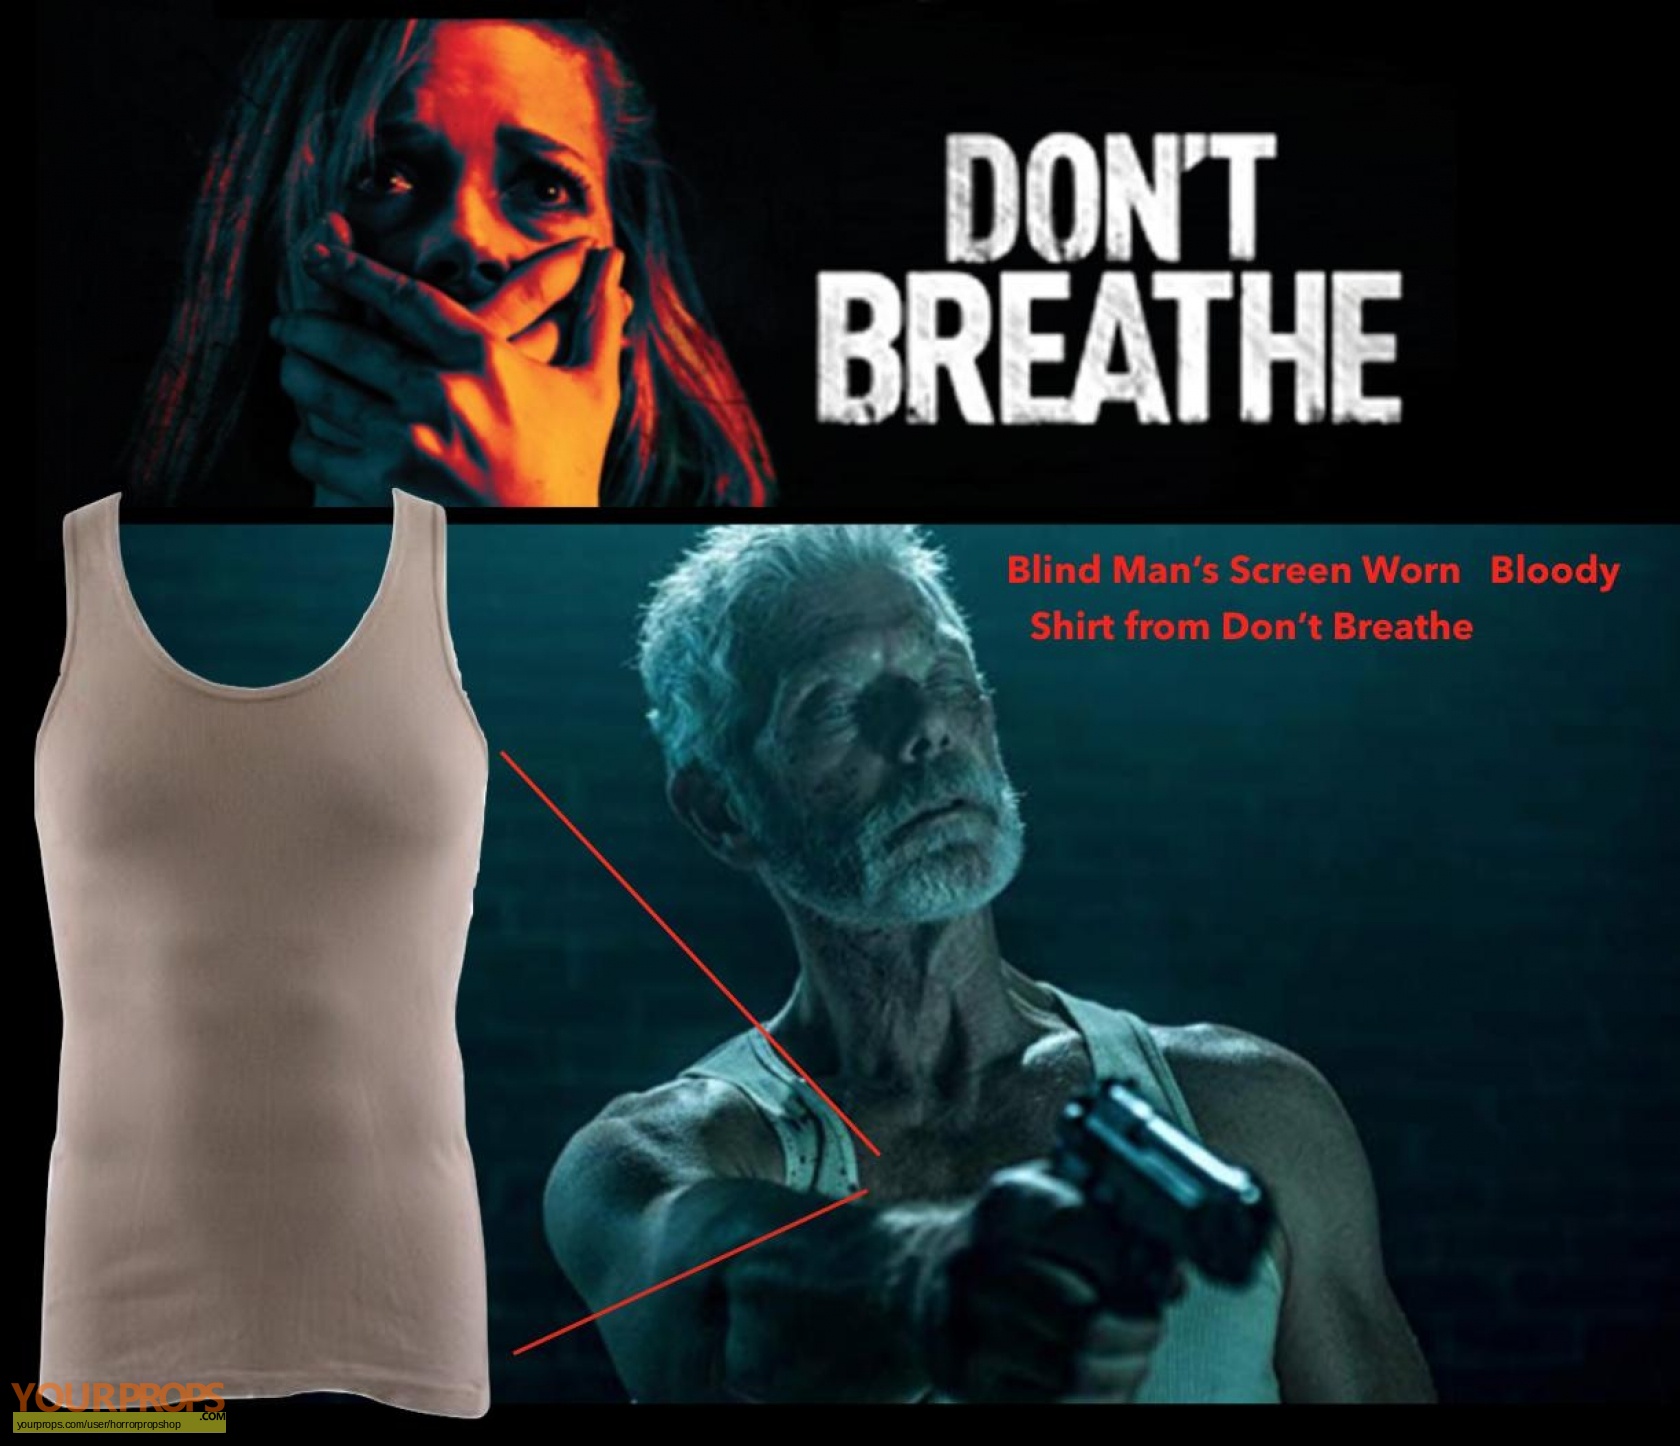 Don T Breathe Blind Man S Bloody Tank Top For Sale Original Movie